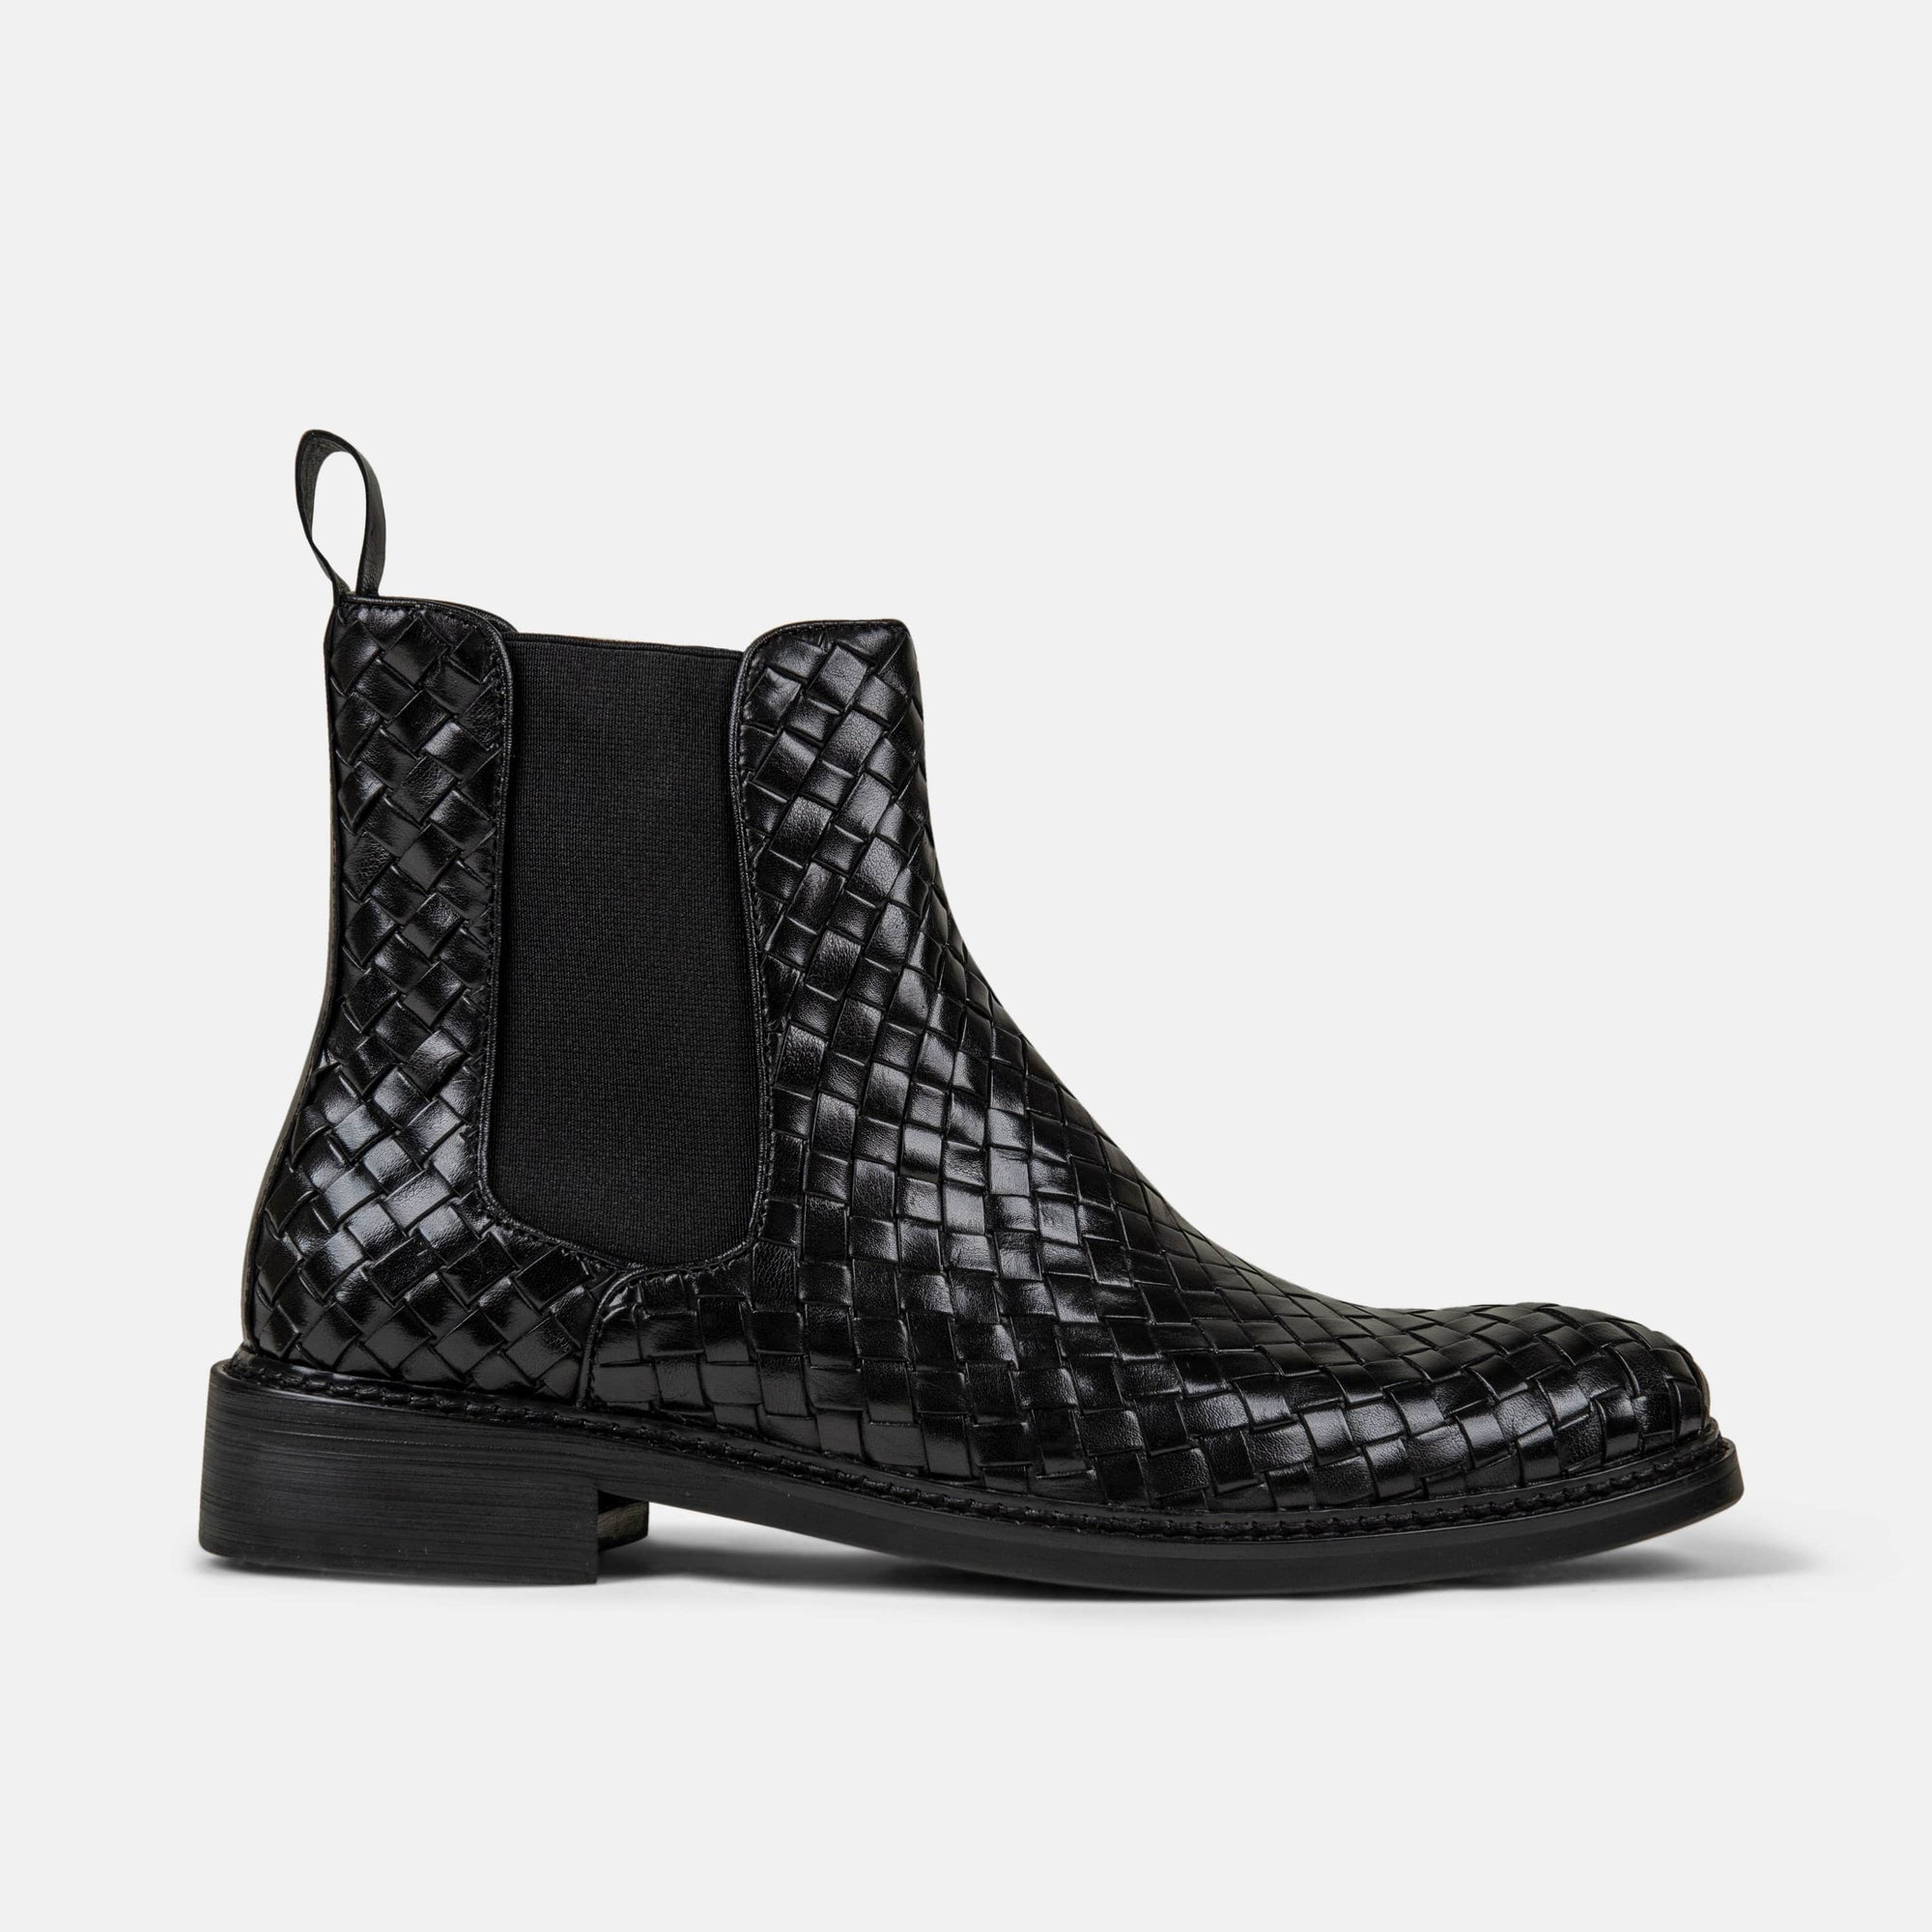 Darwin Black Woven Leather Chelsea Boots